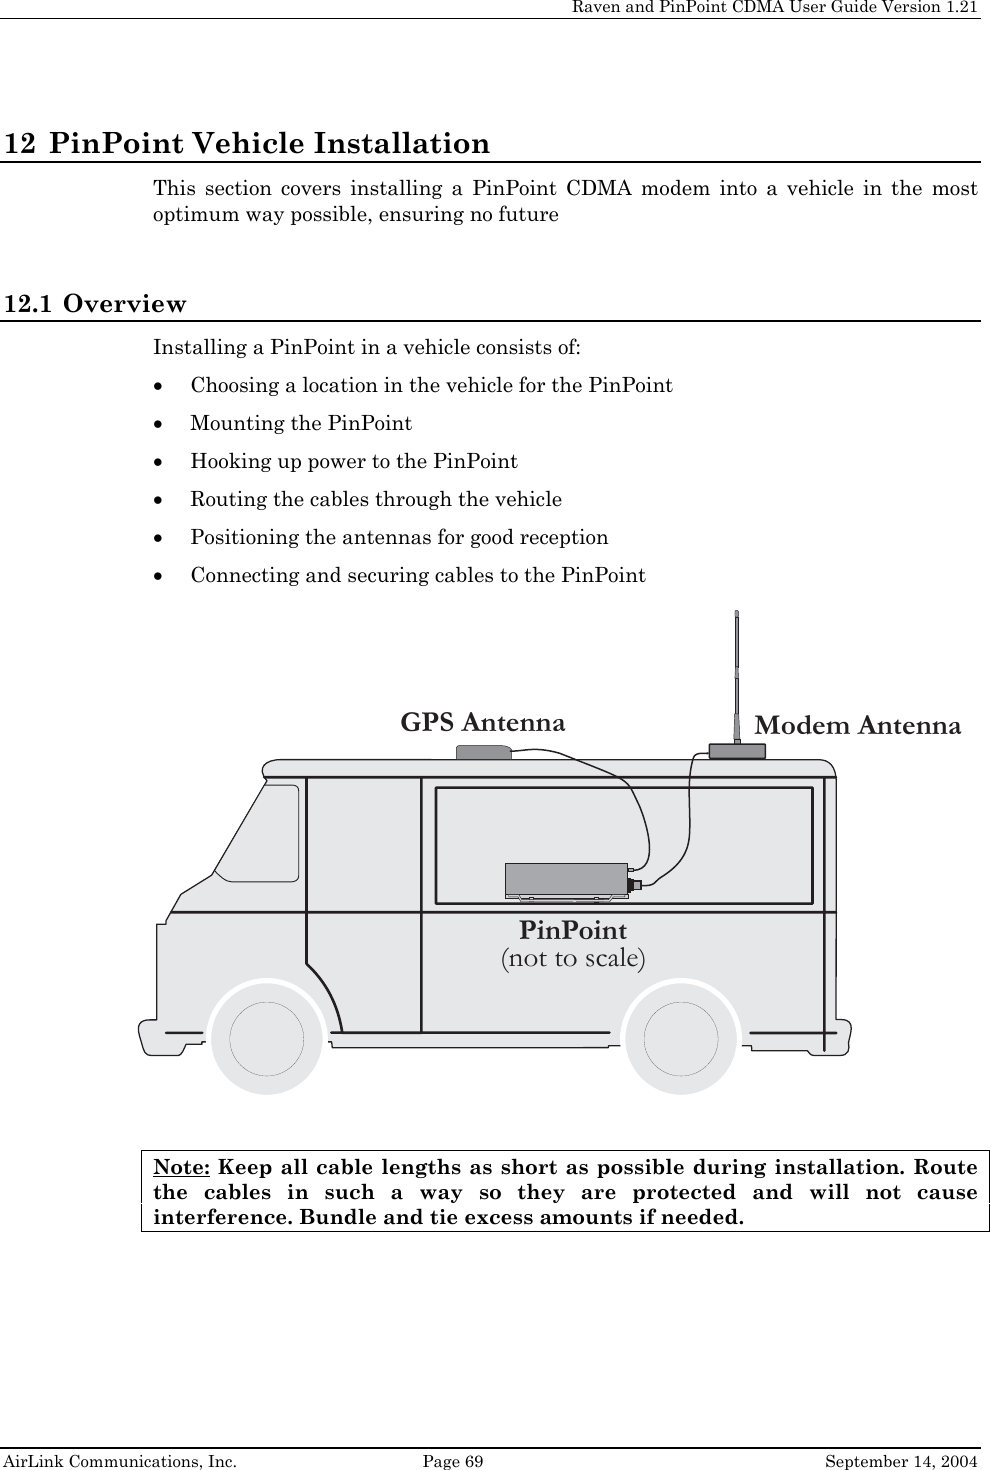     Raven and PinPoint CDMA User Guide Version 1.21  AirLink Communications, Inc.  Page 69  September 14, 2004 12 PinPoint Vehicle Installation This section covers installing a PinPoint CDMA modem into a vehicle in the most optimum way possible, ensuring no future  12.1 Overview Installing a PinPoint in a vehicle consists of: • Choosing a location in the vehicle for the PinPoint • Mounting the PinPoint • Hooking up power to the PinPoint • Routing the cables through the vehicle • Positioning the antennas for good reception • Connecting and securing cables to the PinPoint  Modem AntennaGPS AntennaPinPoint(not to scale)Note: Keep all cable lengths as short as possible during installation. Route the cables in such a way so they are protected and will not cause interference. Bundle and tie excess amounts if needed. 